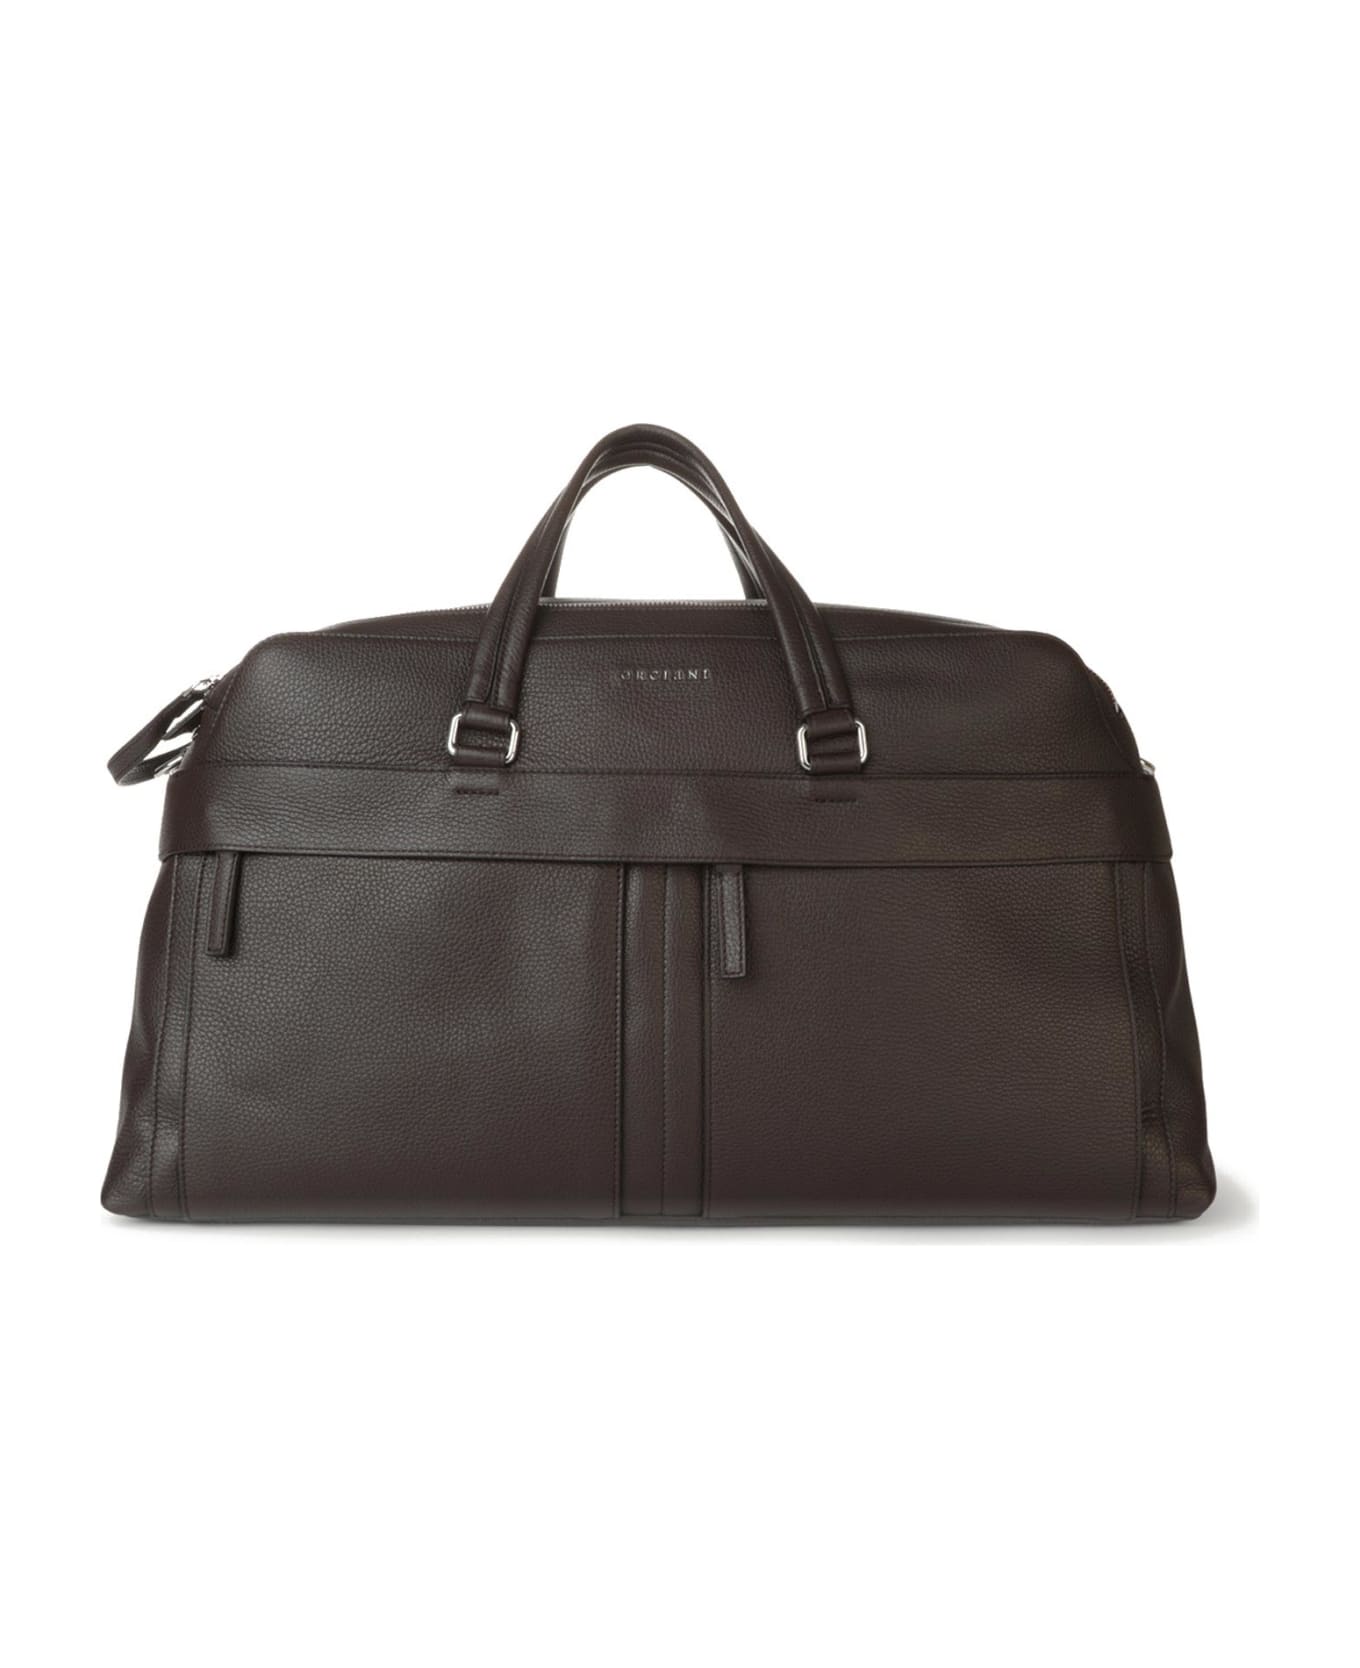 Orciani Micron Leather Bag With Shoulder Strap - EBANO